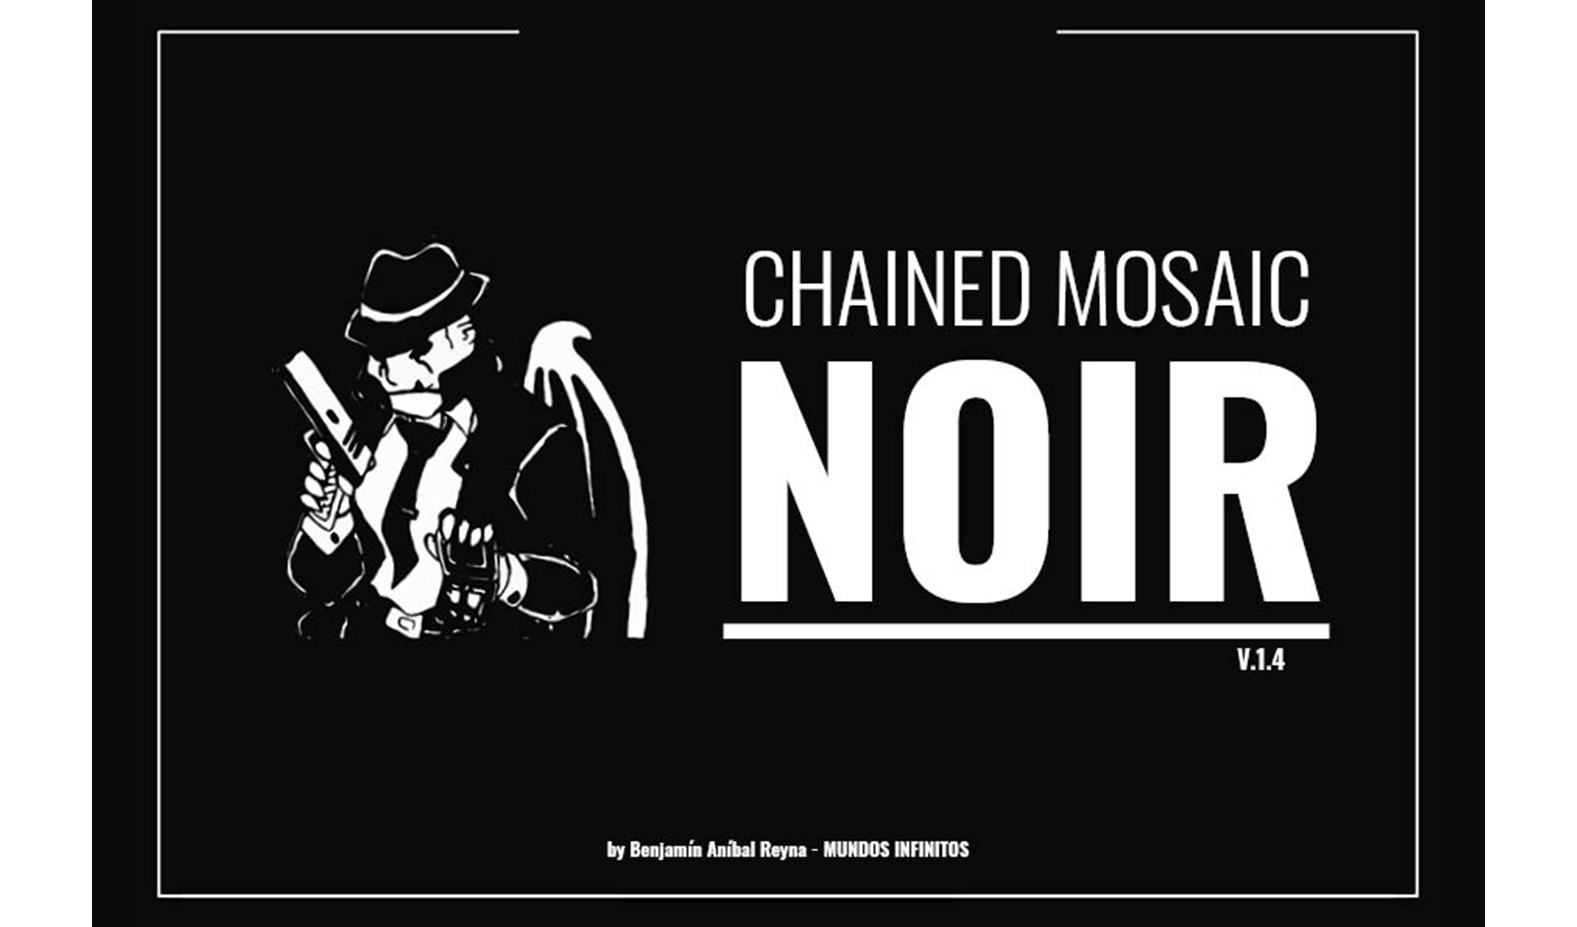 Chained Mosaic: Noir